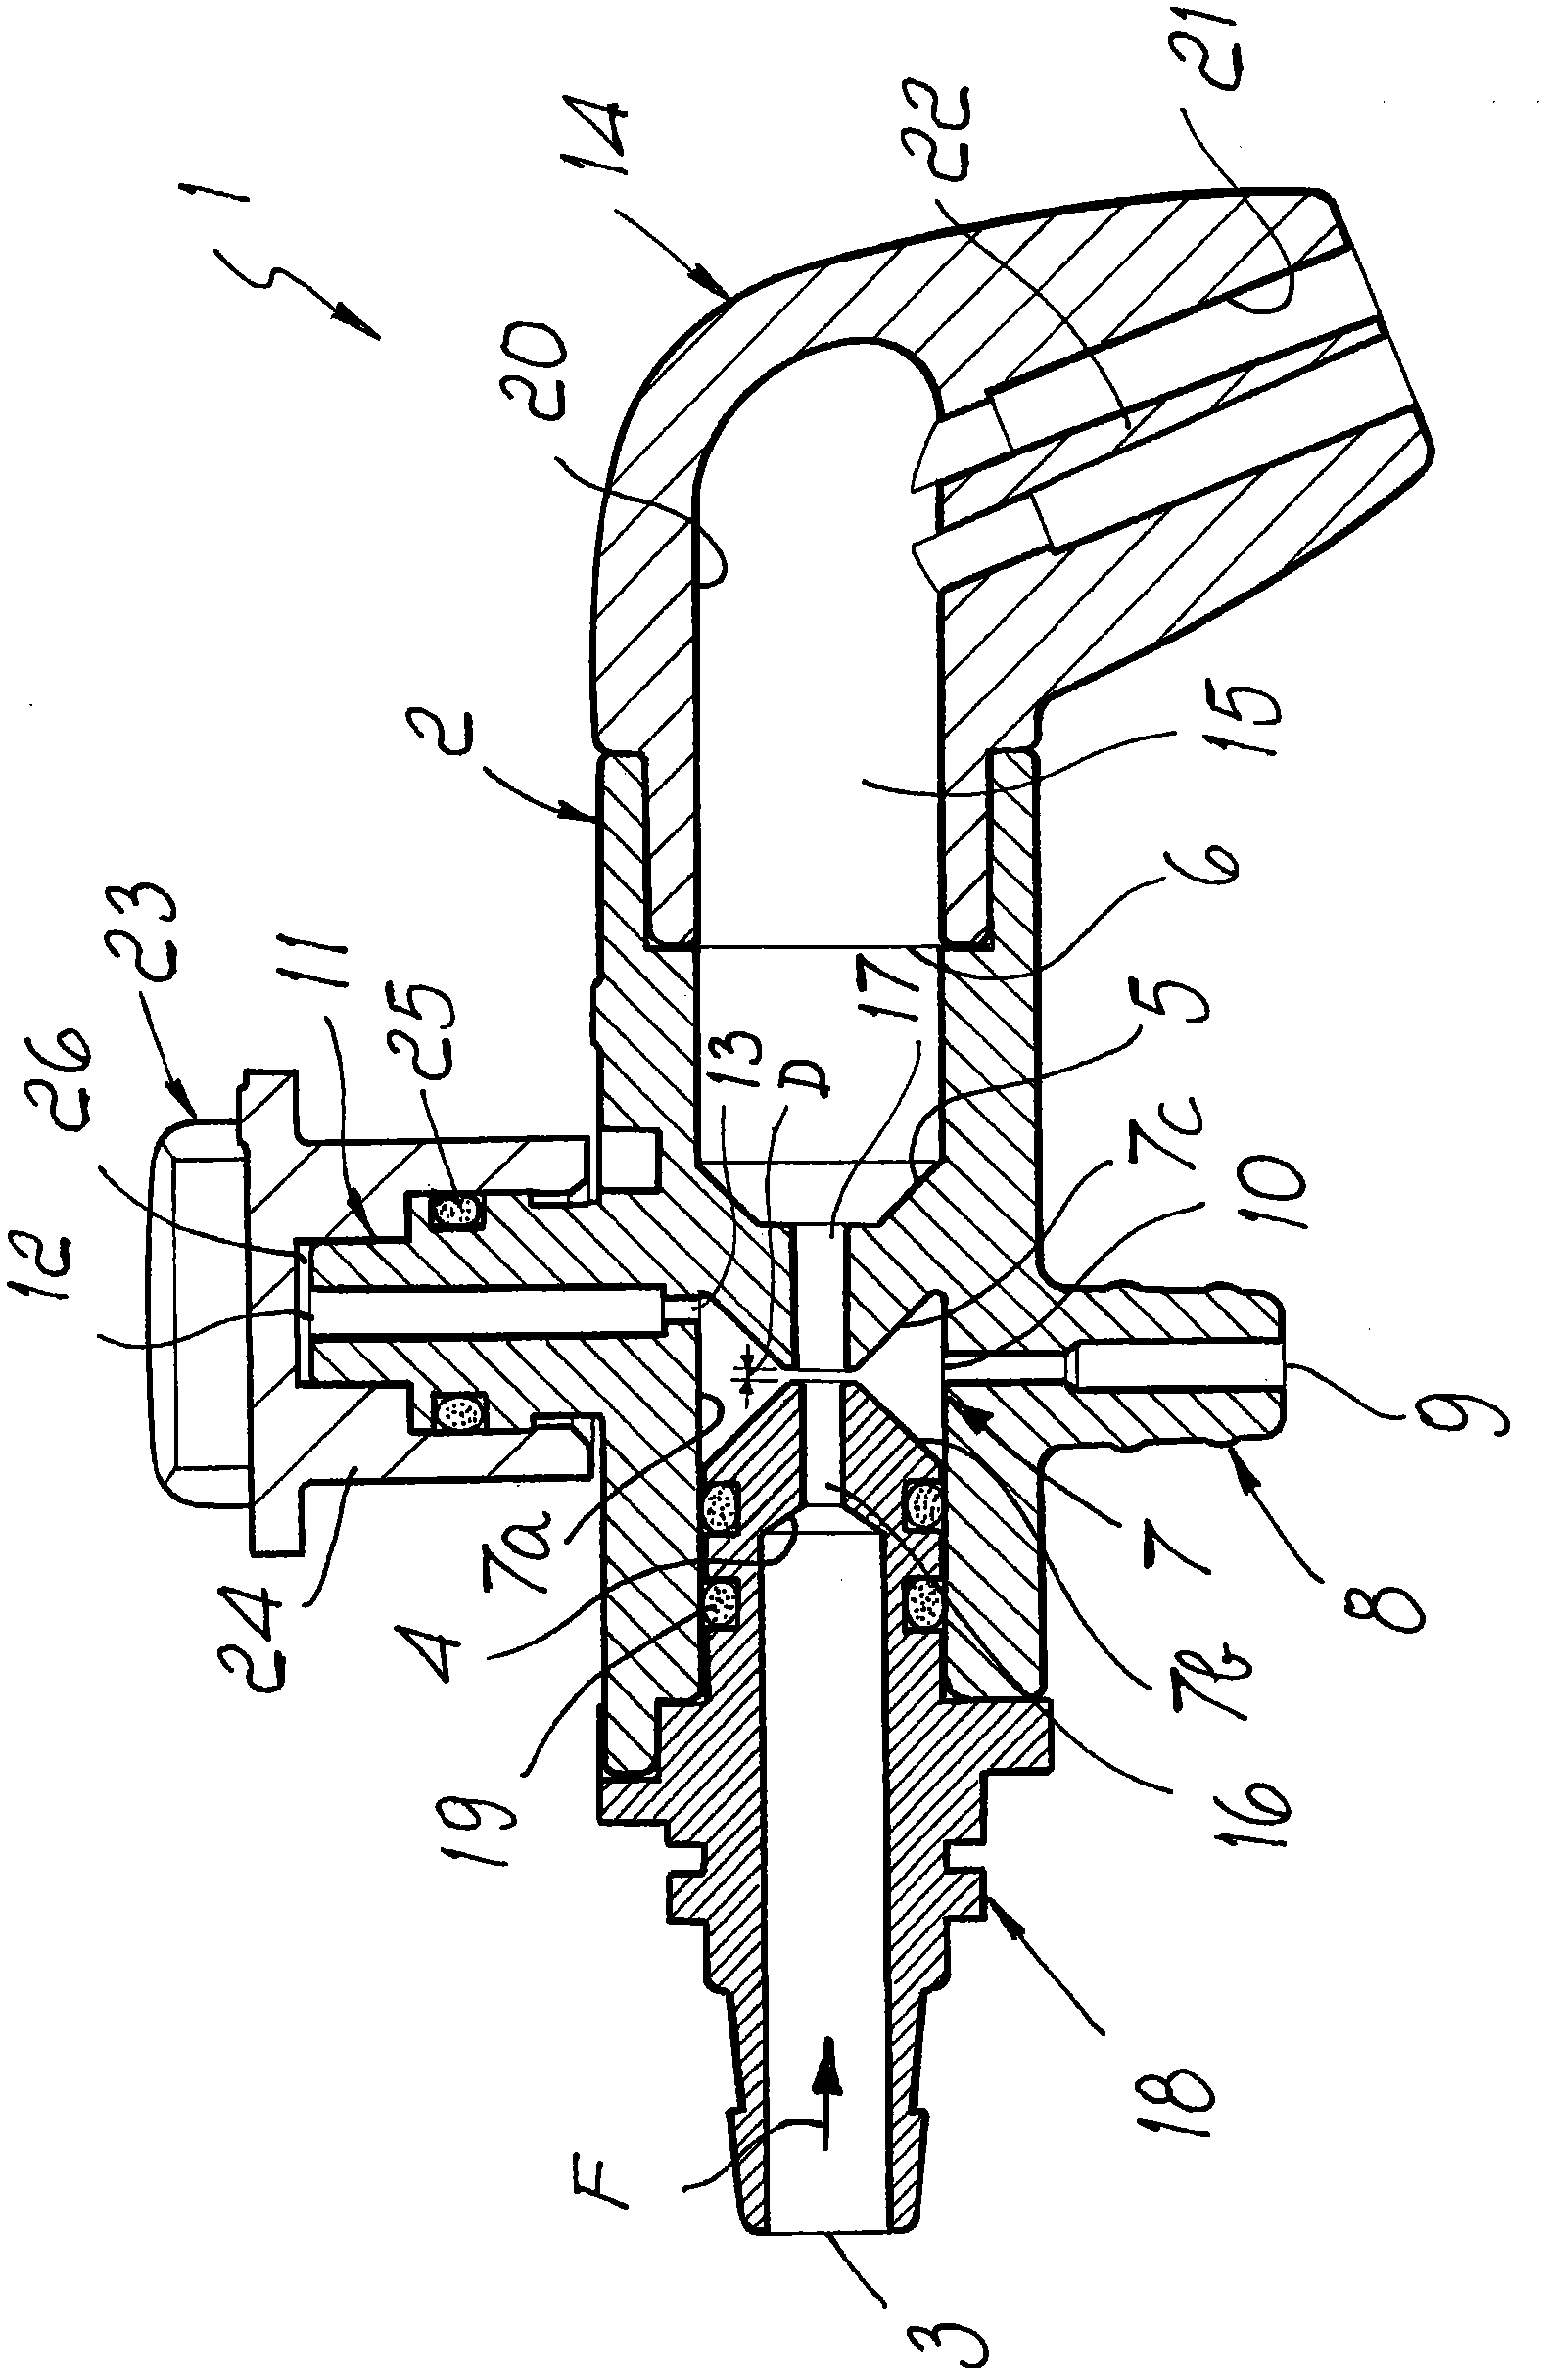 Device for heating and/or frothing milk for machines for preparing hot beverages such as a cappuccino